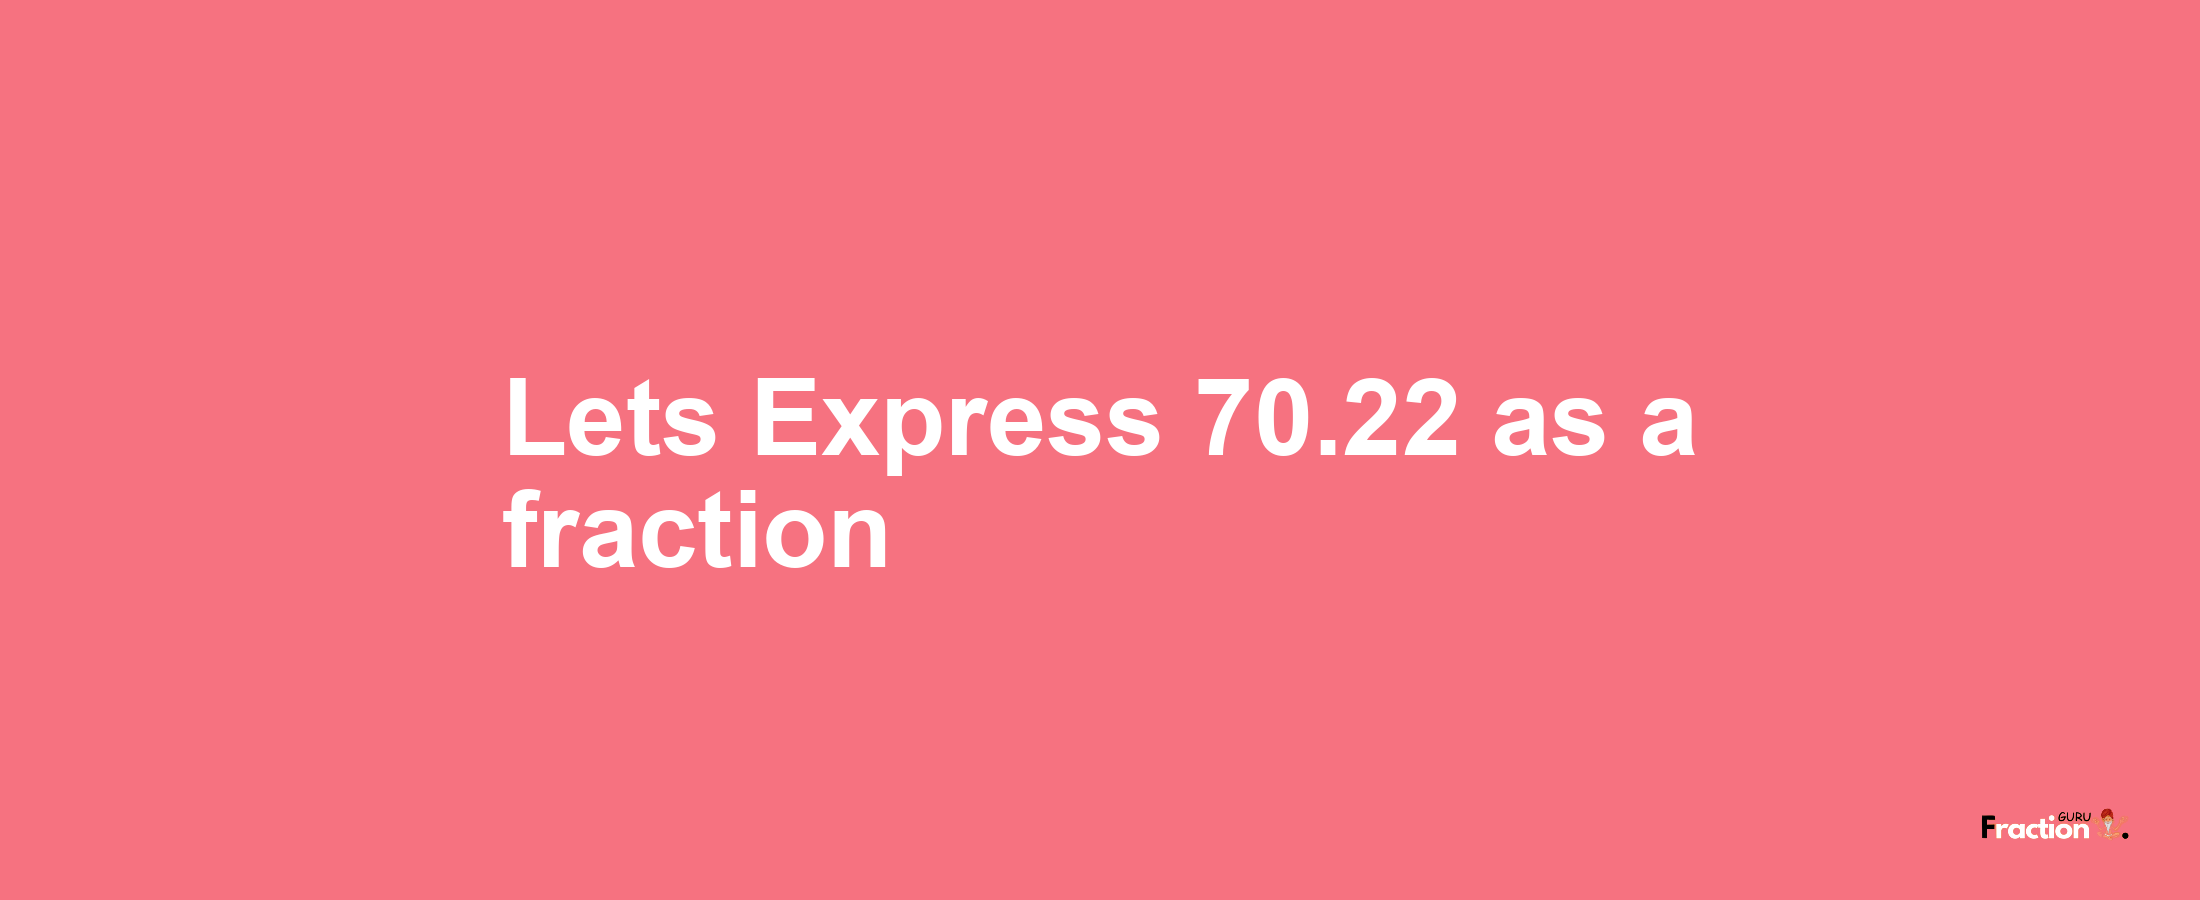 Lets Express 70.22 as afraction